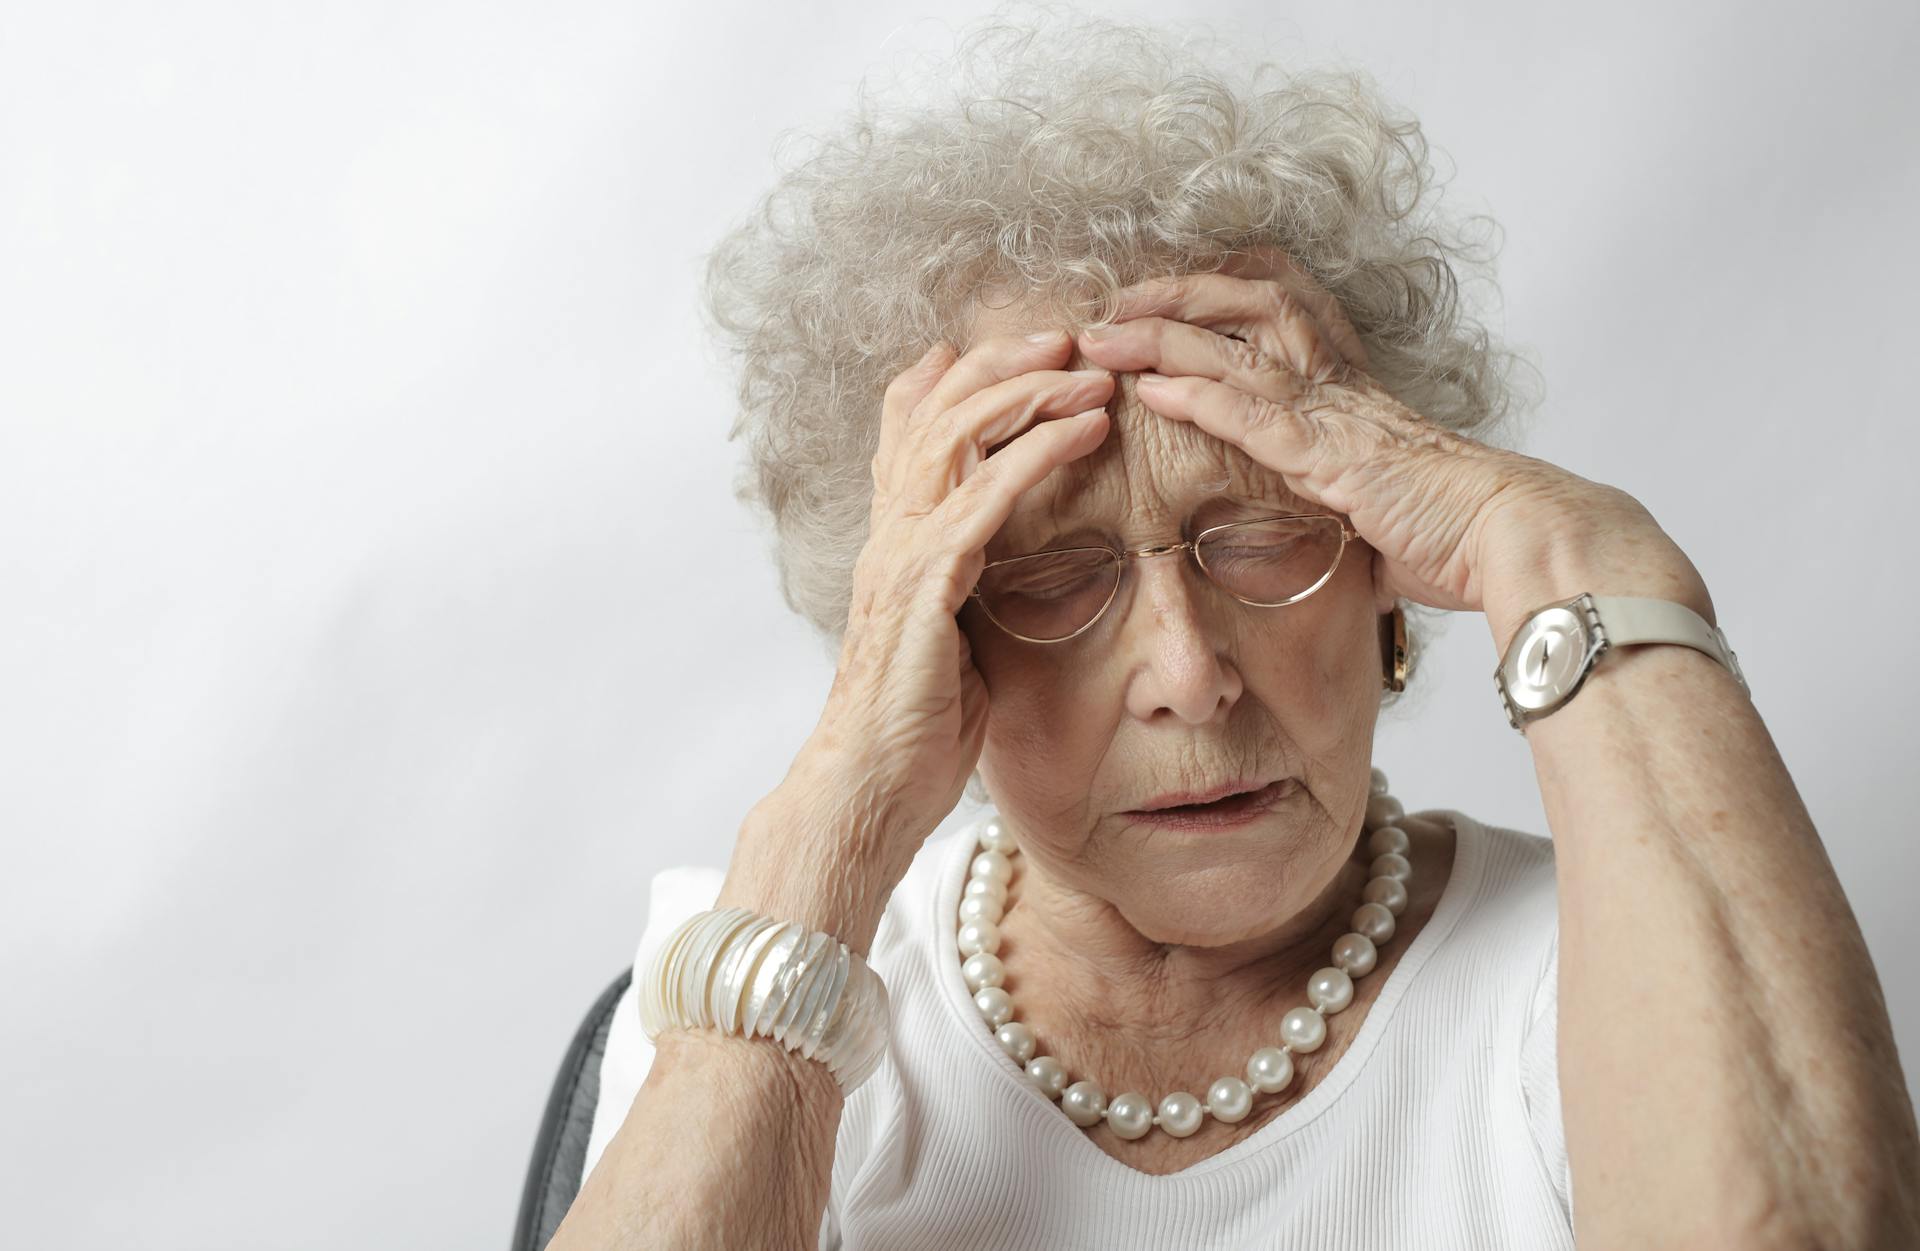 An old woman with her hands on her head | Source: Pexels